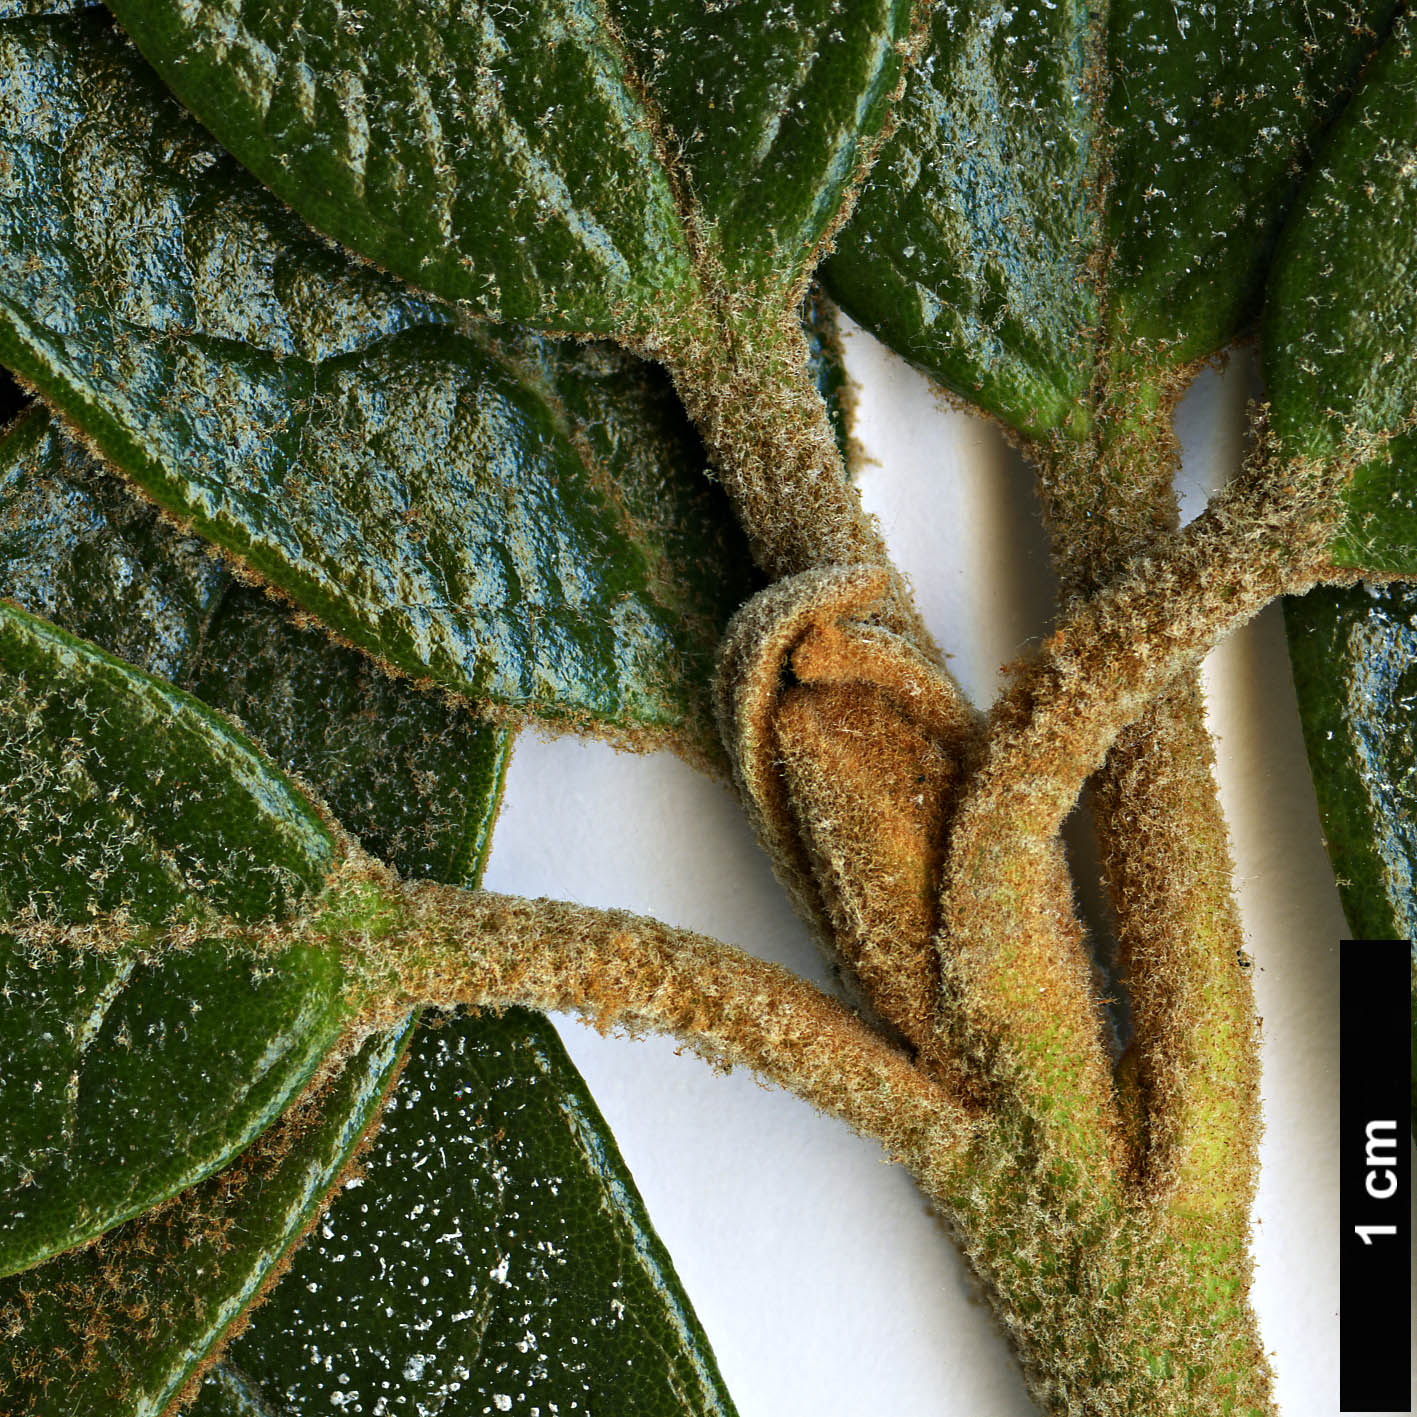 High resolution image: Family: Ericaceae - Genus: Rhododendron - Taxon: wiltonii